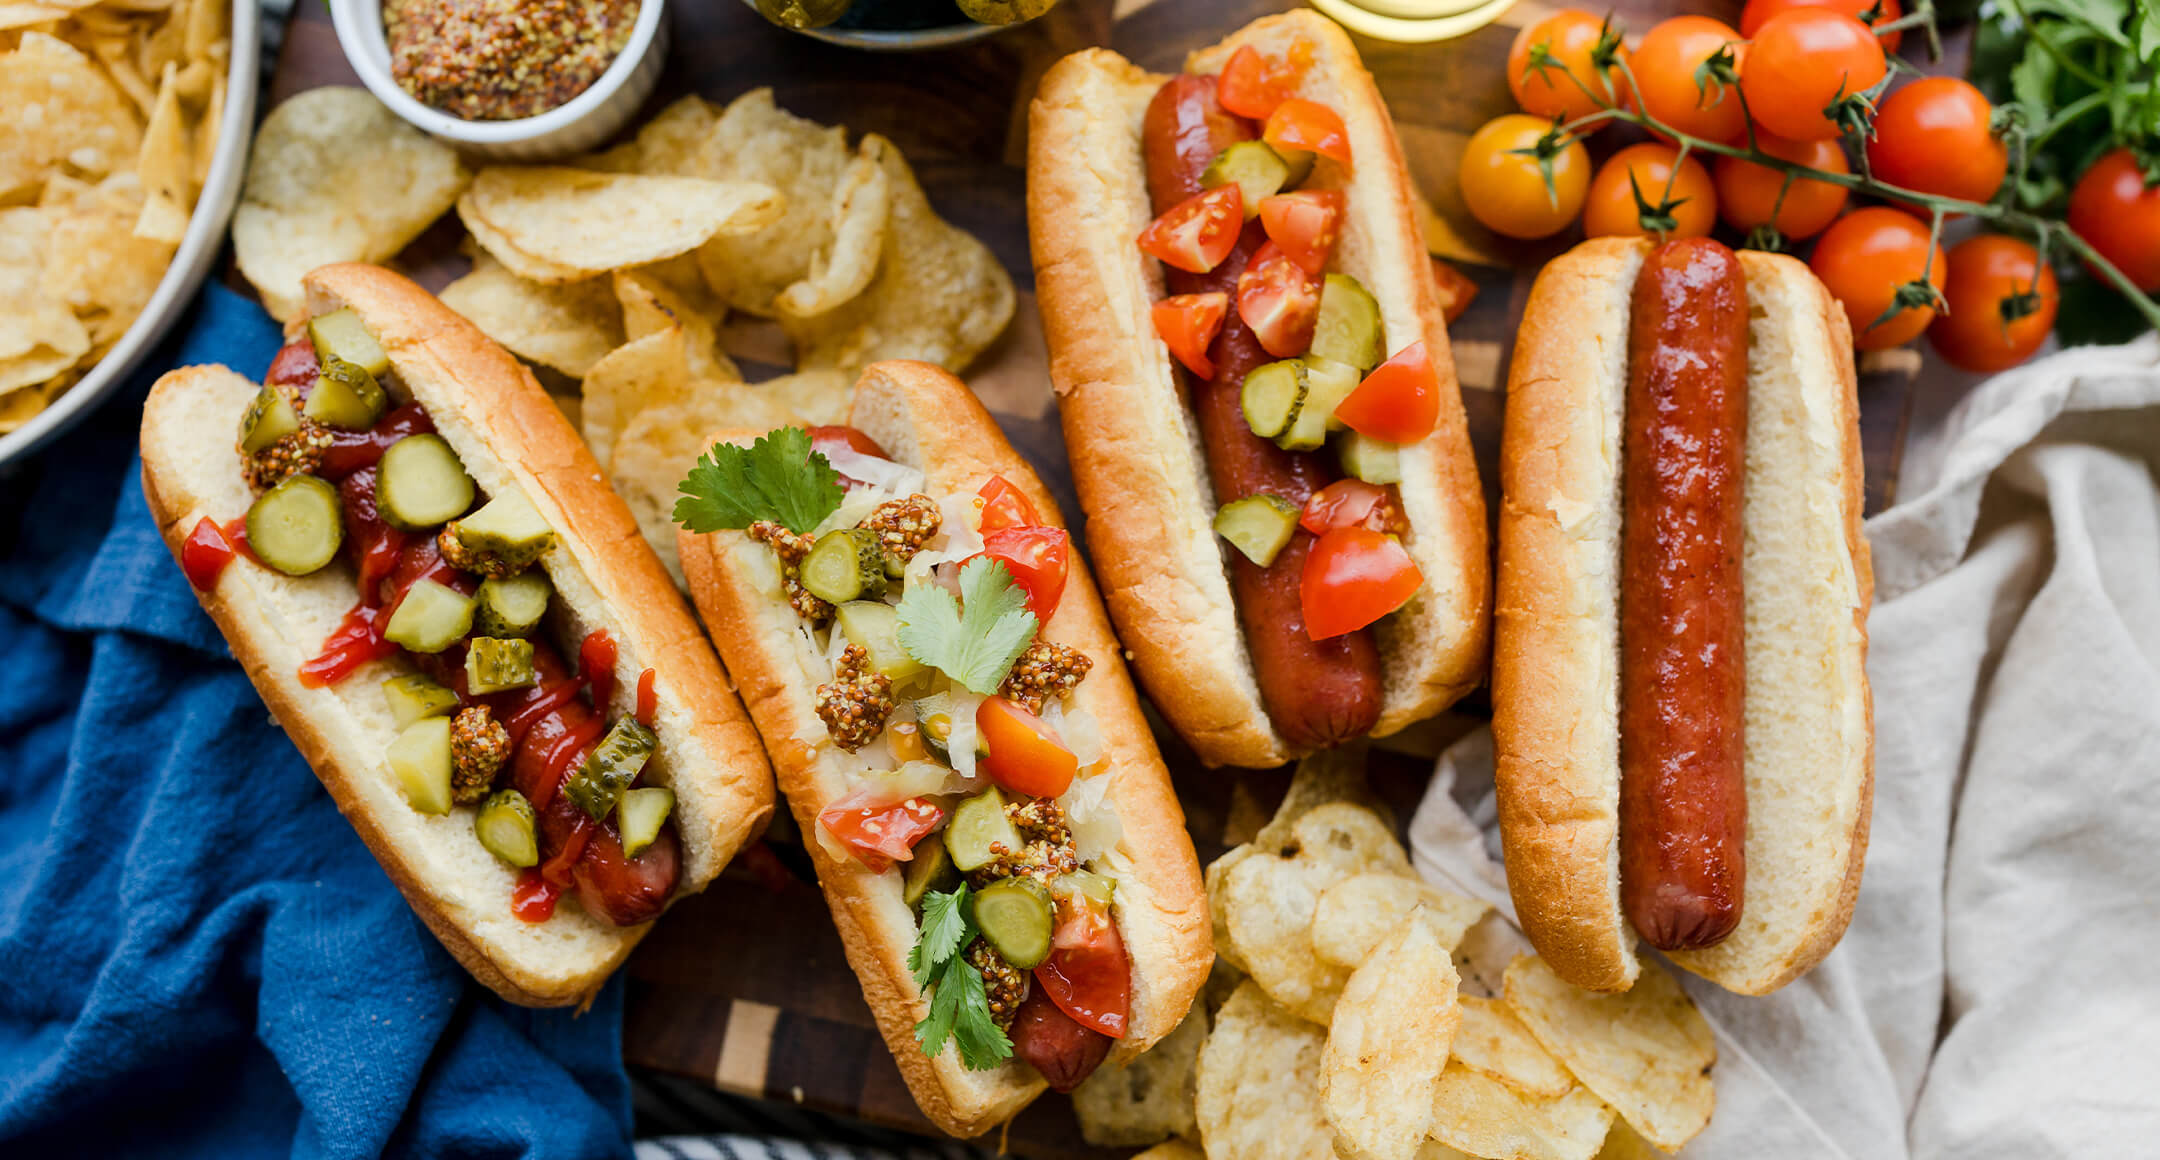 Four New Seasons Uncured Beef Hot Dogs in buns with mustard, chopped tomatoes, and pickles and chips on the side. 